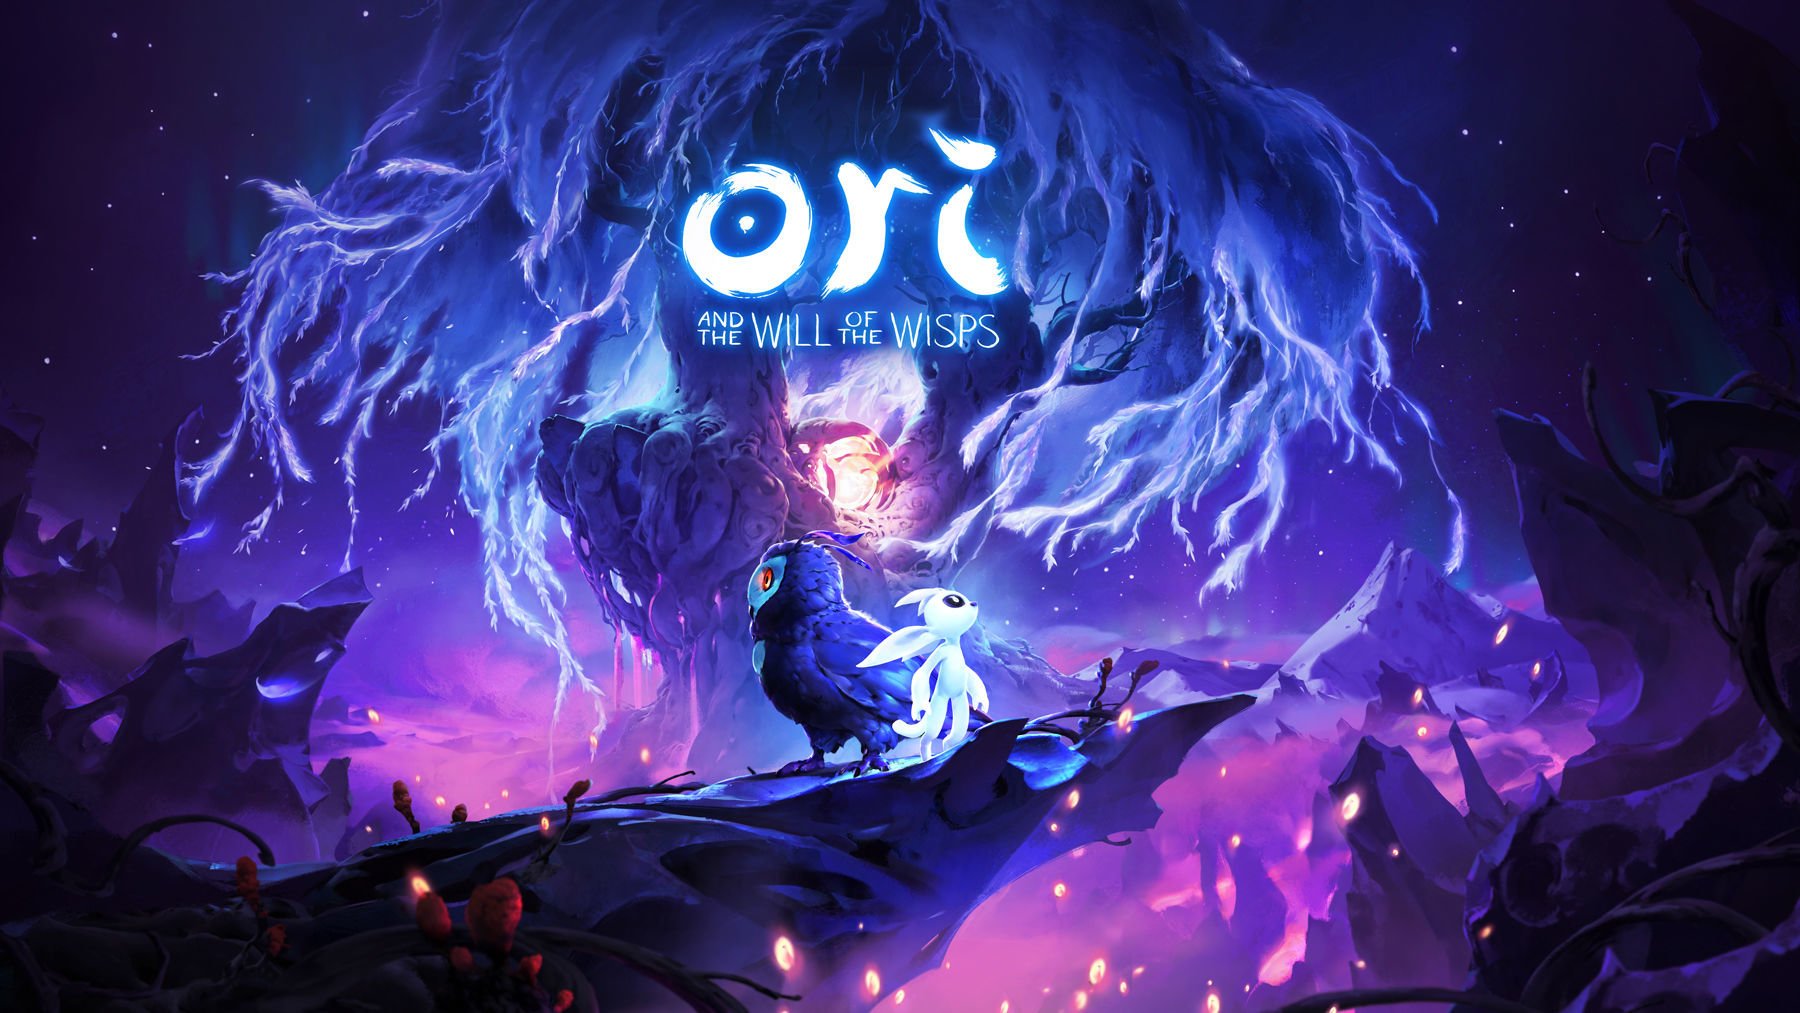 Ori and the will of the wisps na bgs 2019 | dims 2 | married games fling to the finish | fling to the finish | ori and the will of the wisps